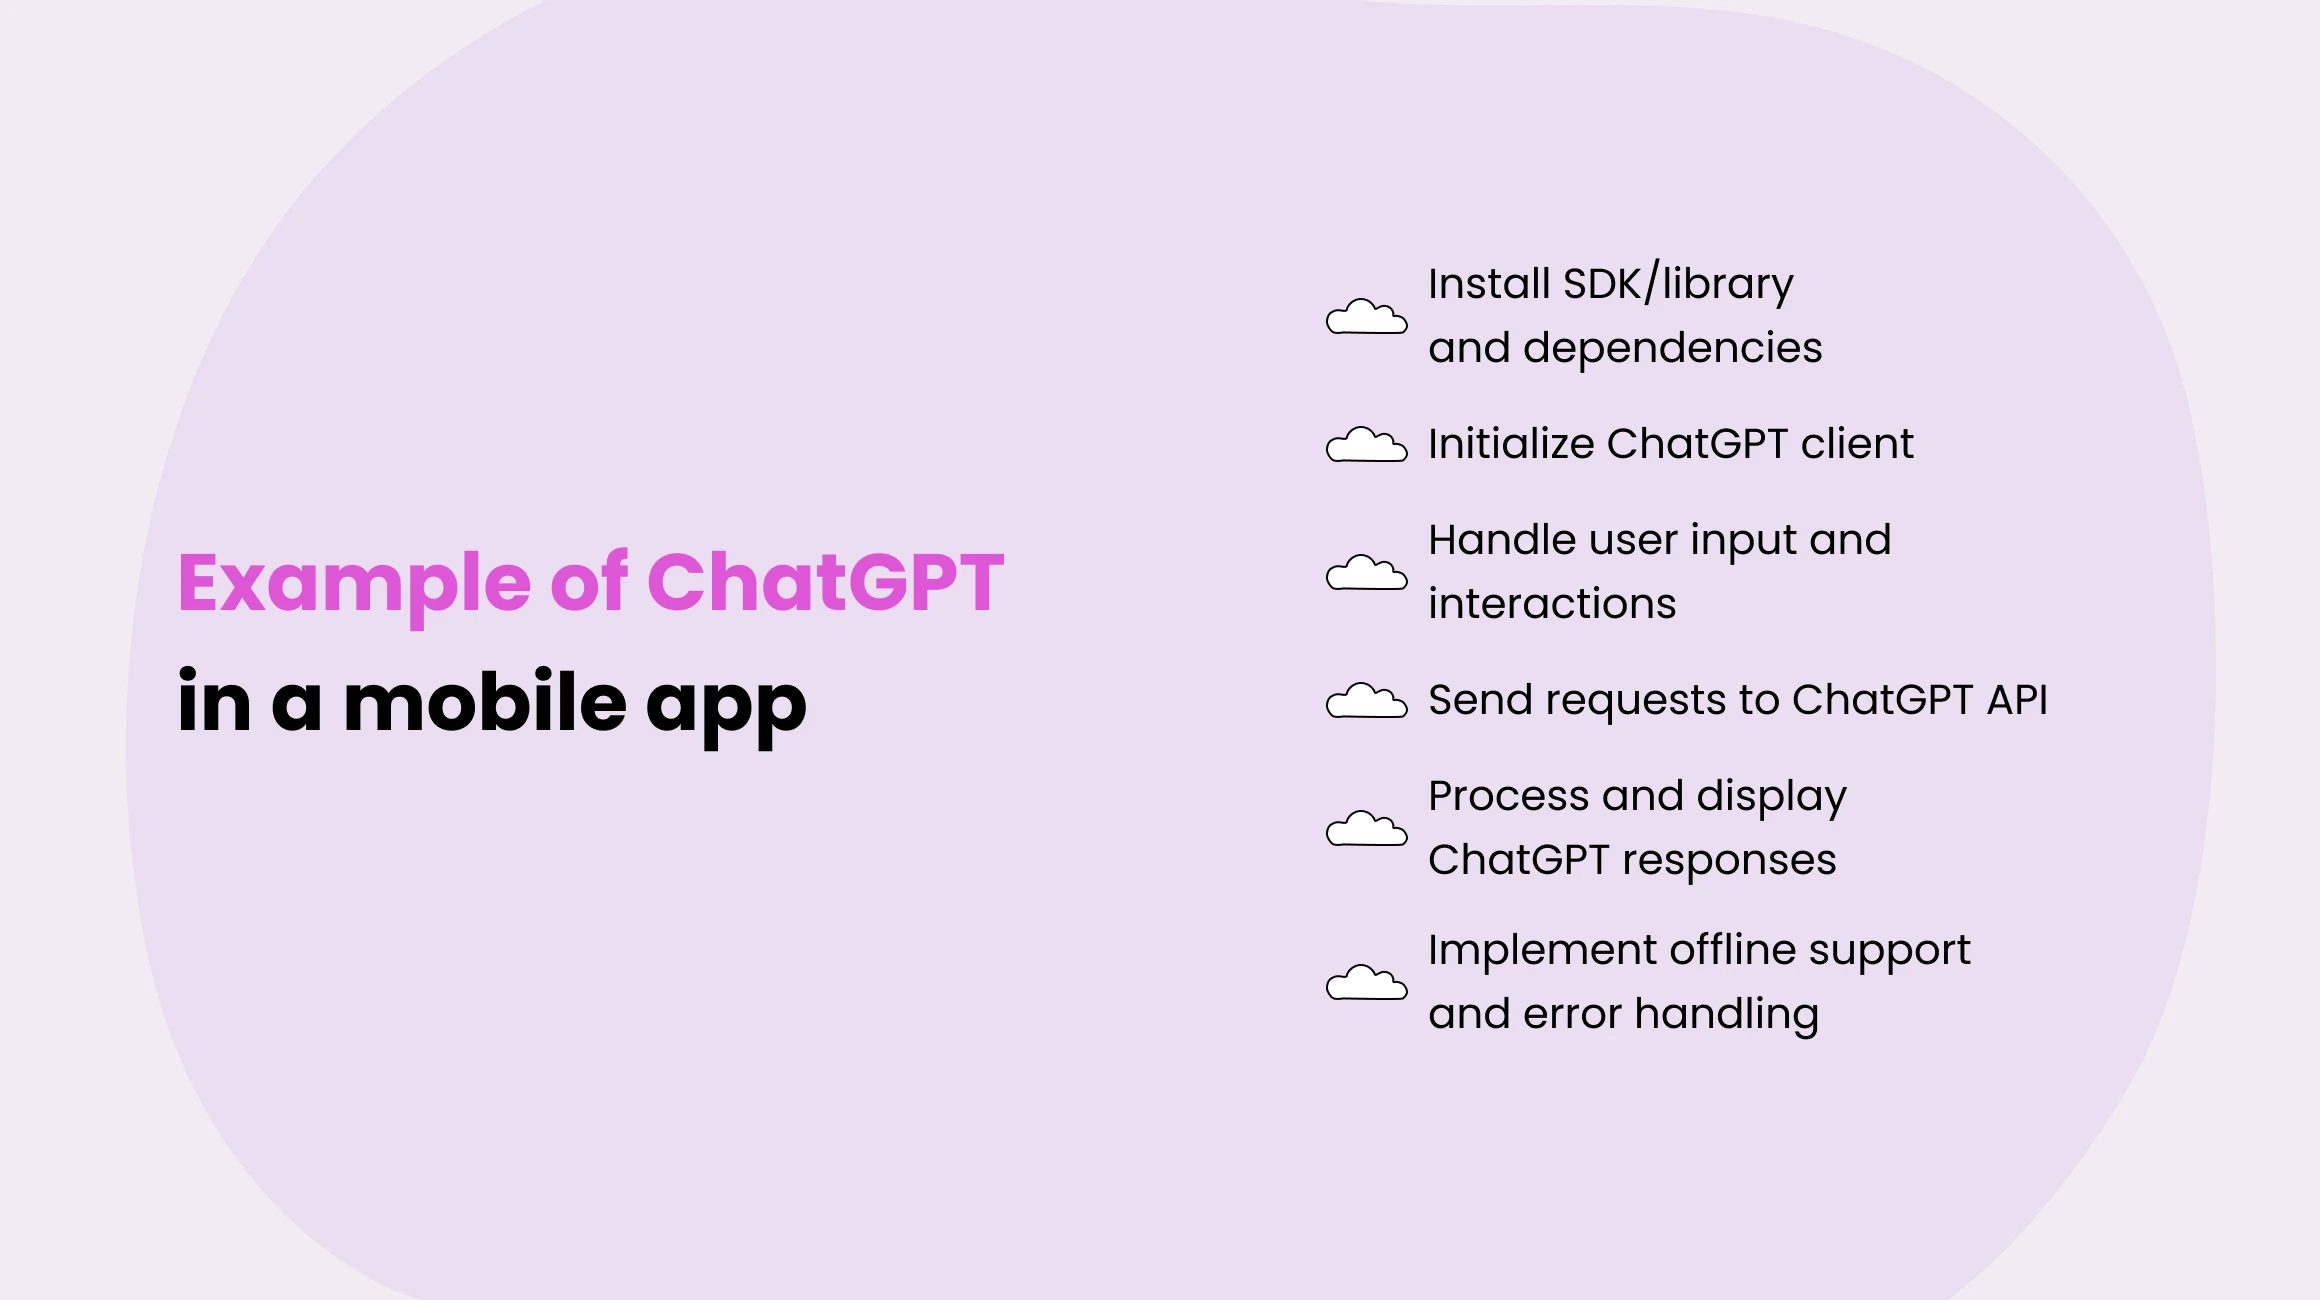 Example of Implementing ChatGPT in a Mobile App